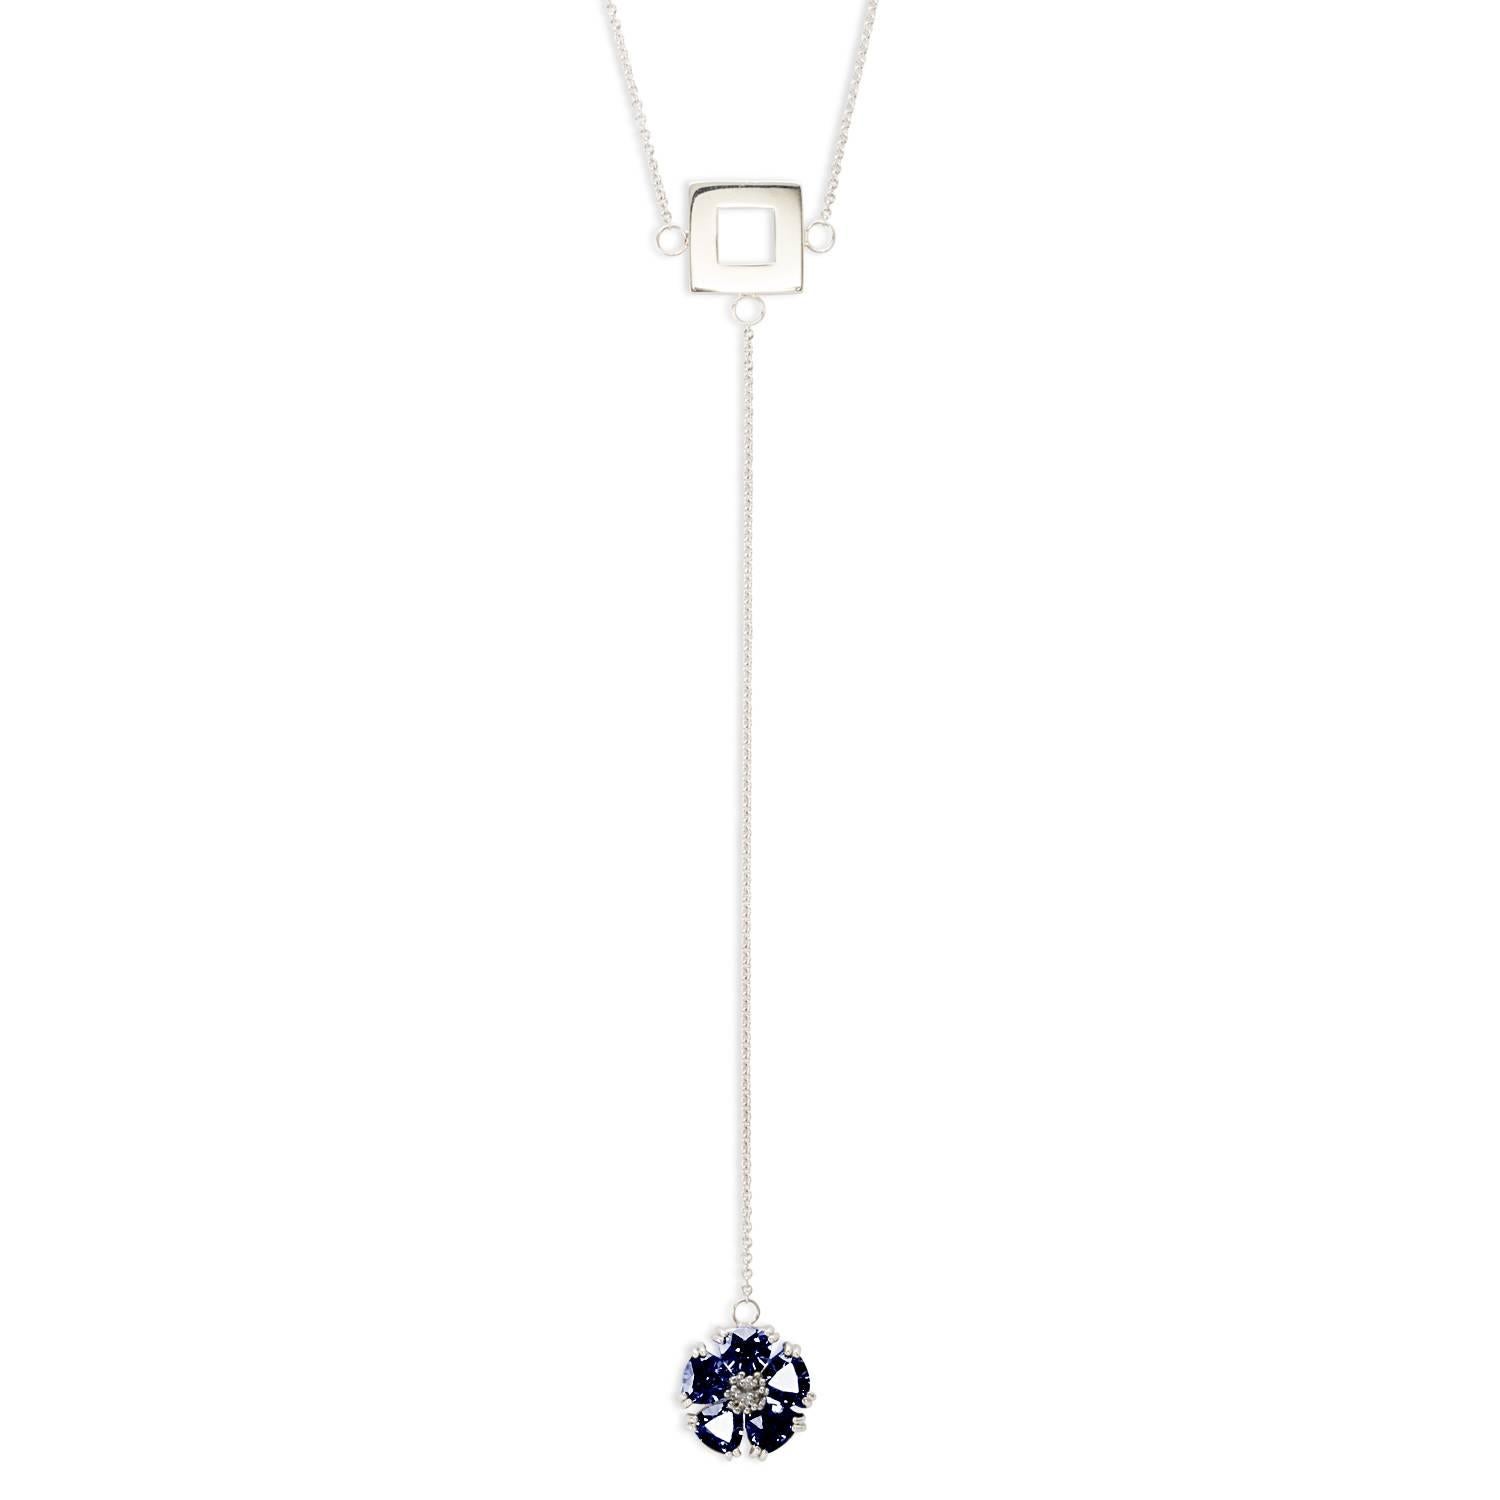 Dark Blue Topaz Blossom Stone and Square Lariat Necklace For Sale